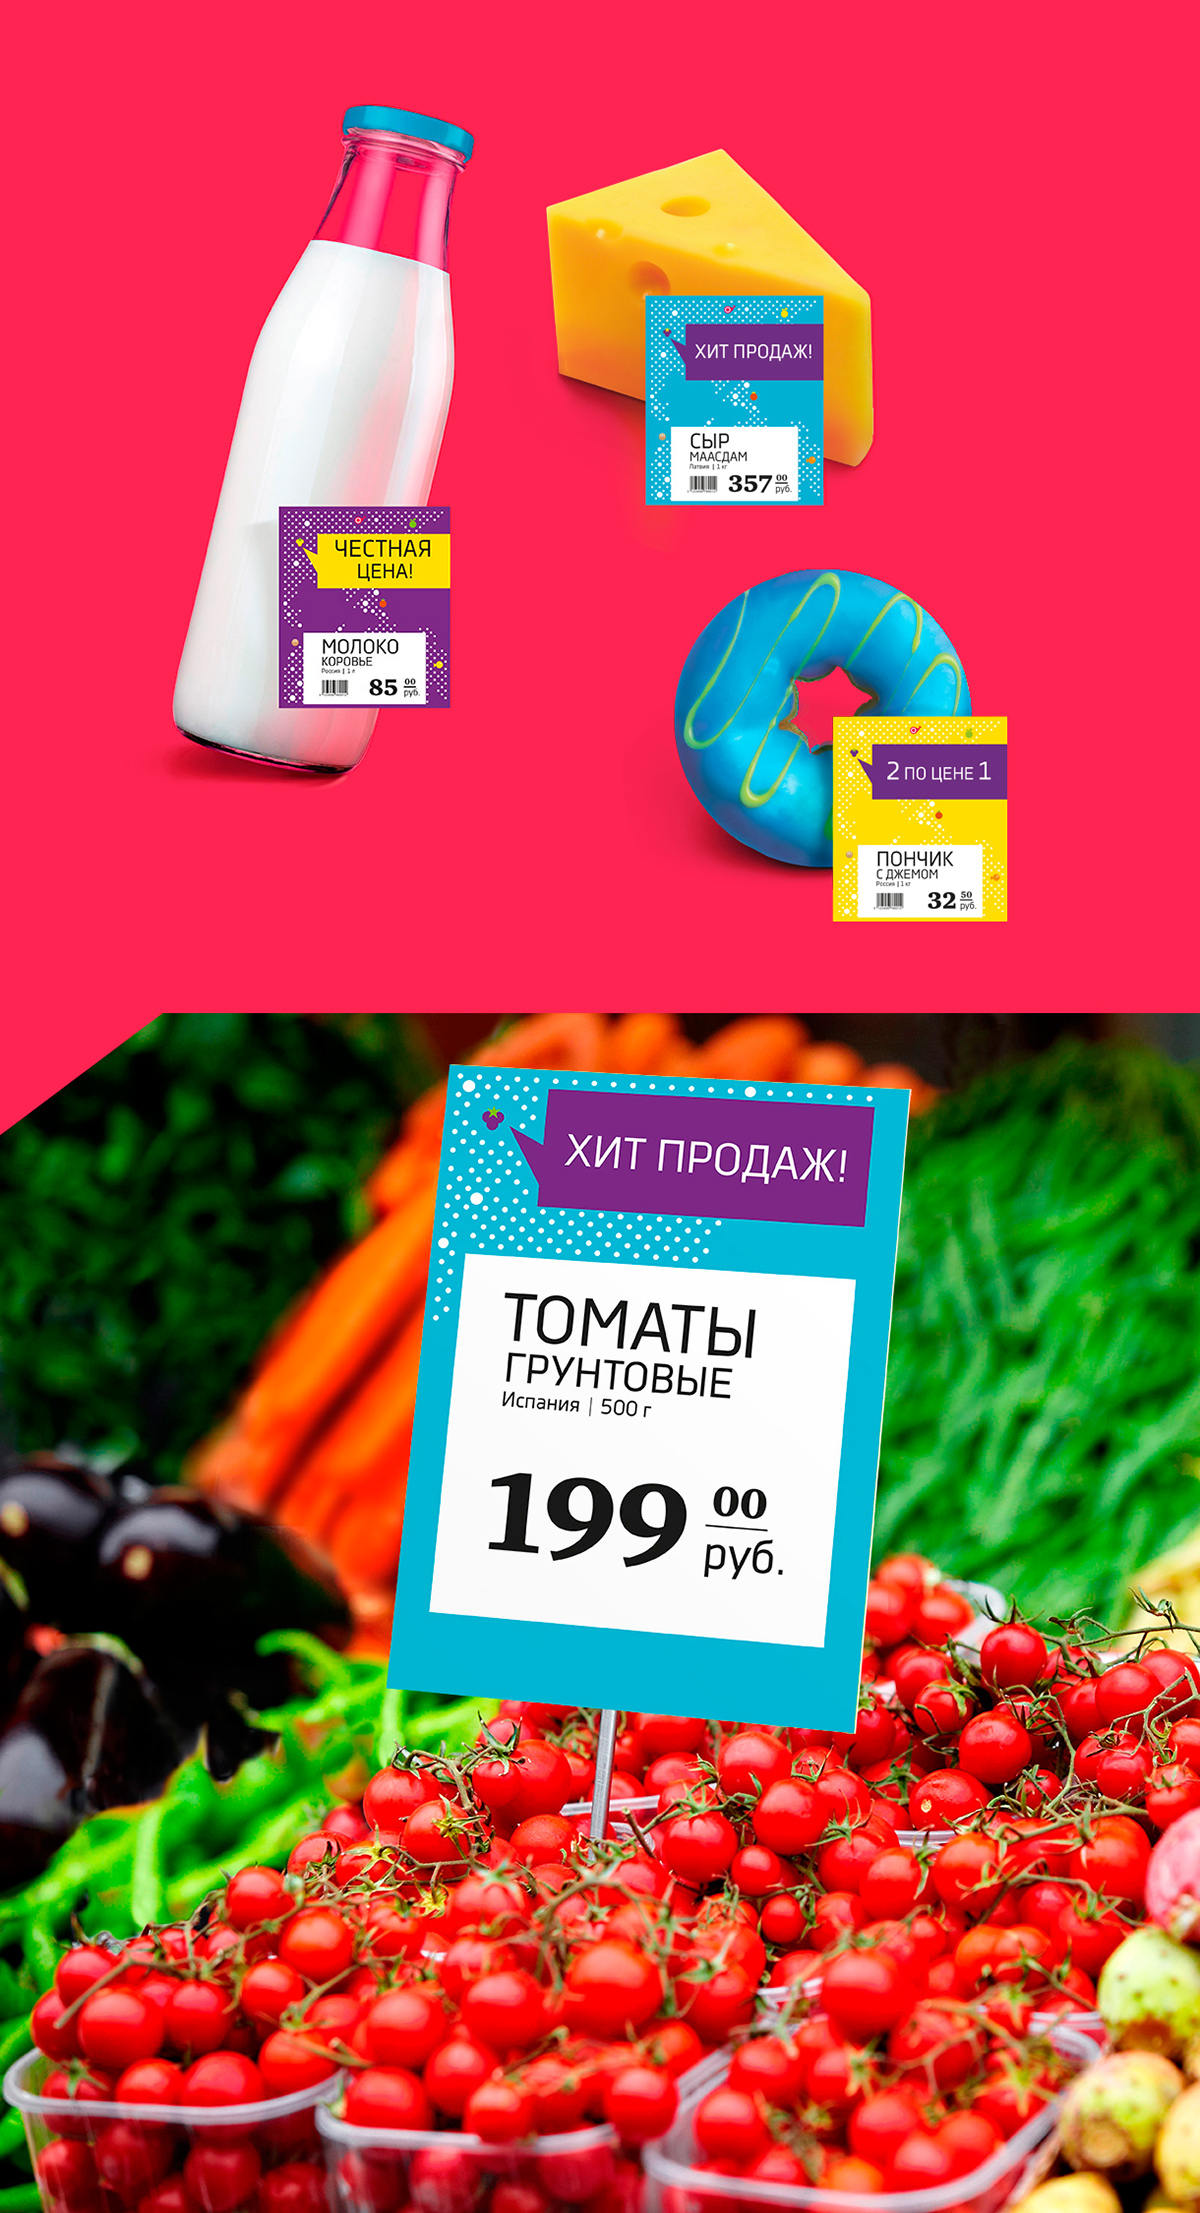 Moscow Russia Corporate Identity 7-th 7-th continent map pattern rebranding Supermarket shop Food  mall advertising design buy color